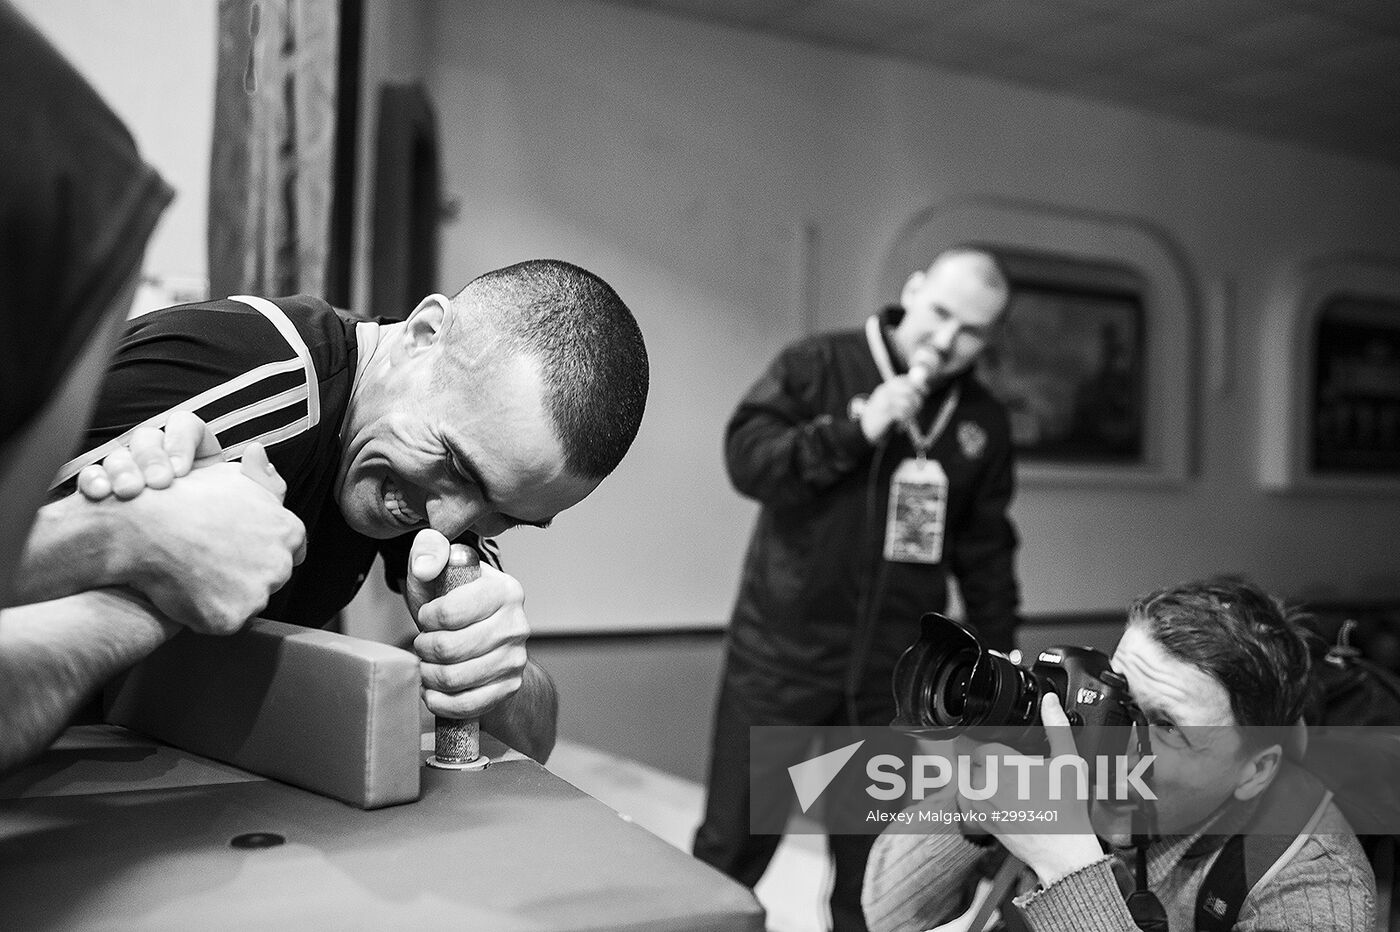 Arm wrestling competition at penitentiary hospital #2 in the Omsk Region